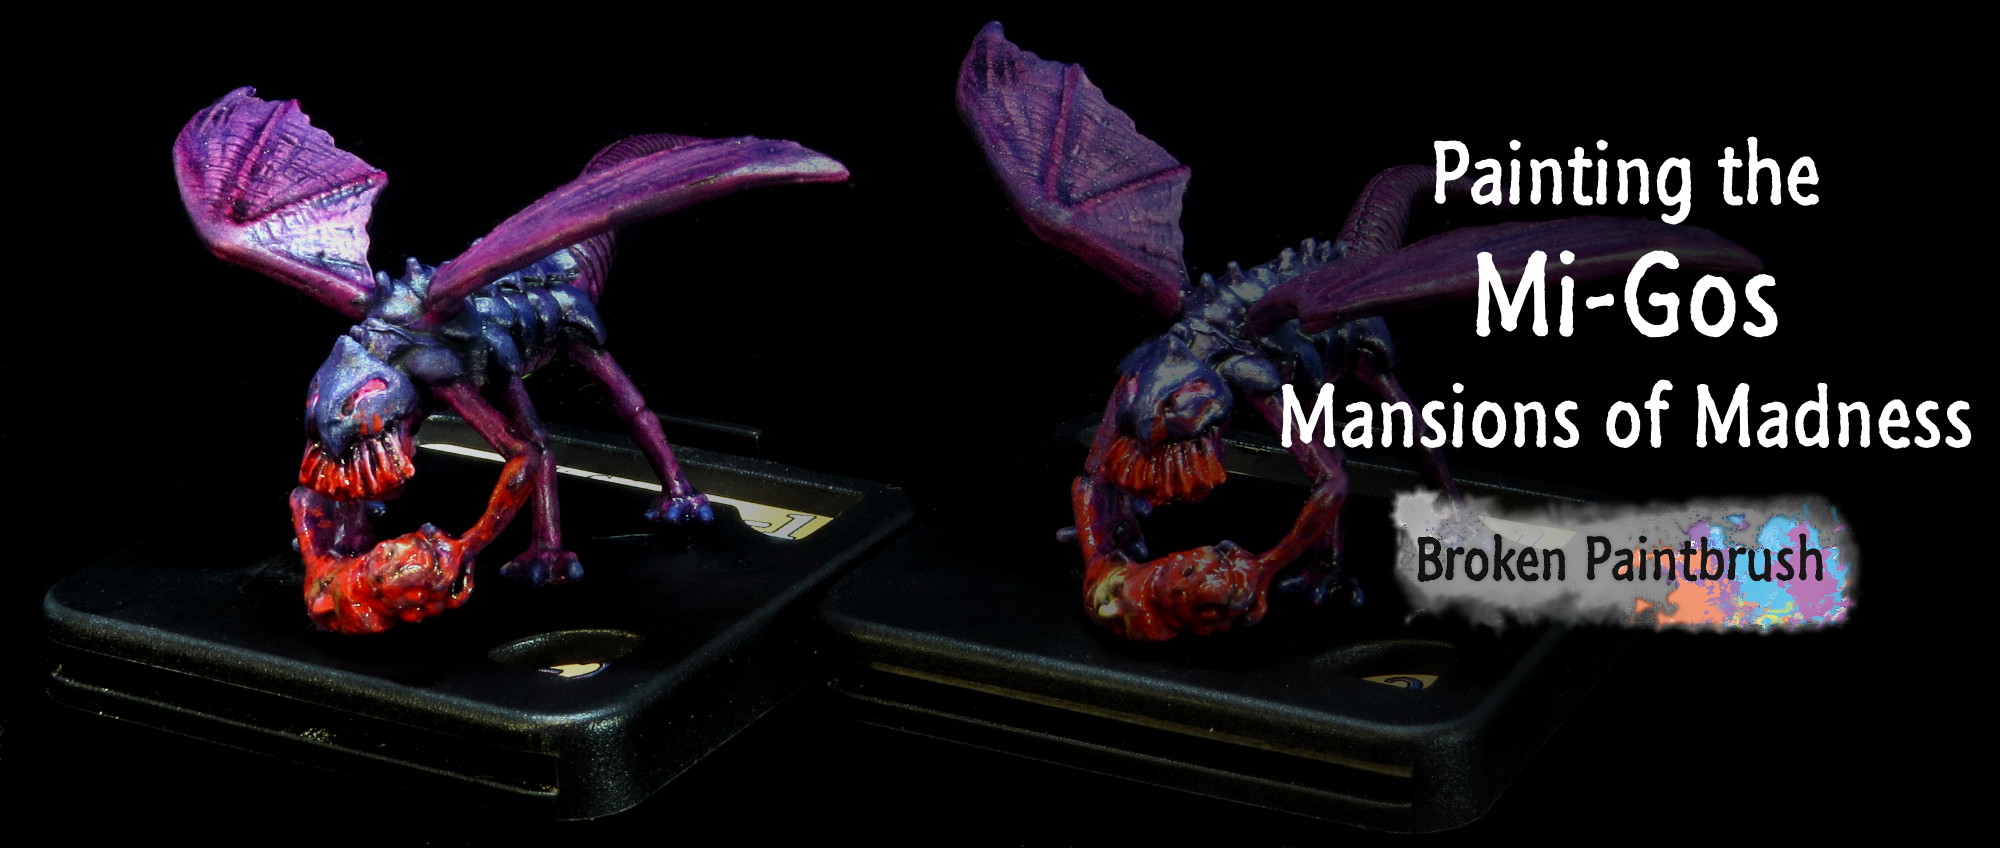 Painting guide for the Mi-Go from Mansions of Madness